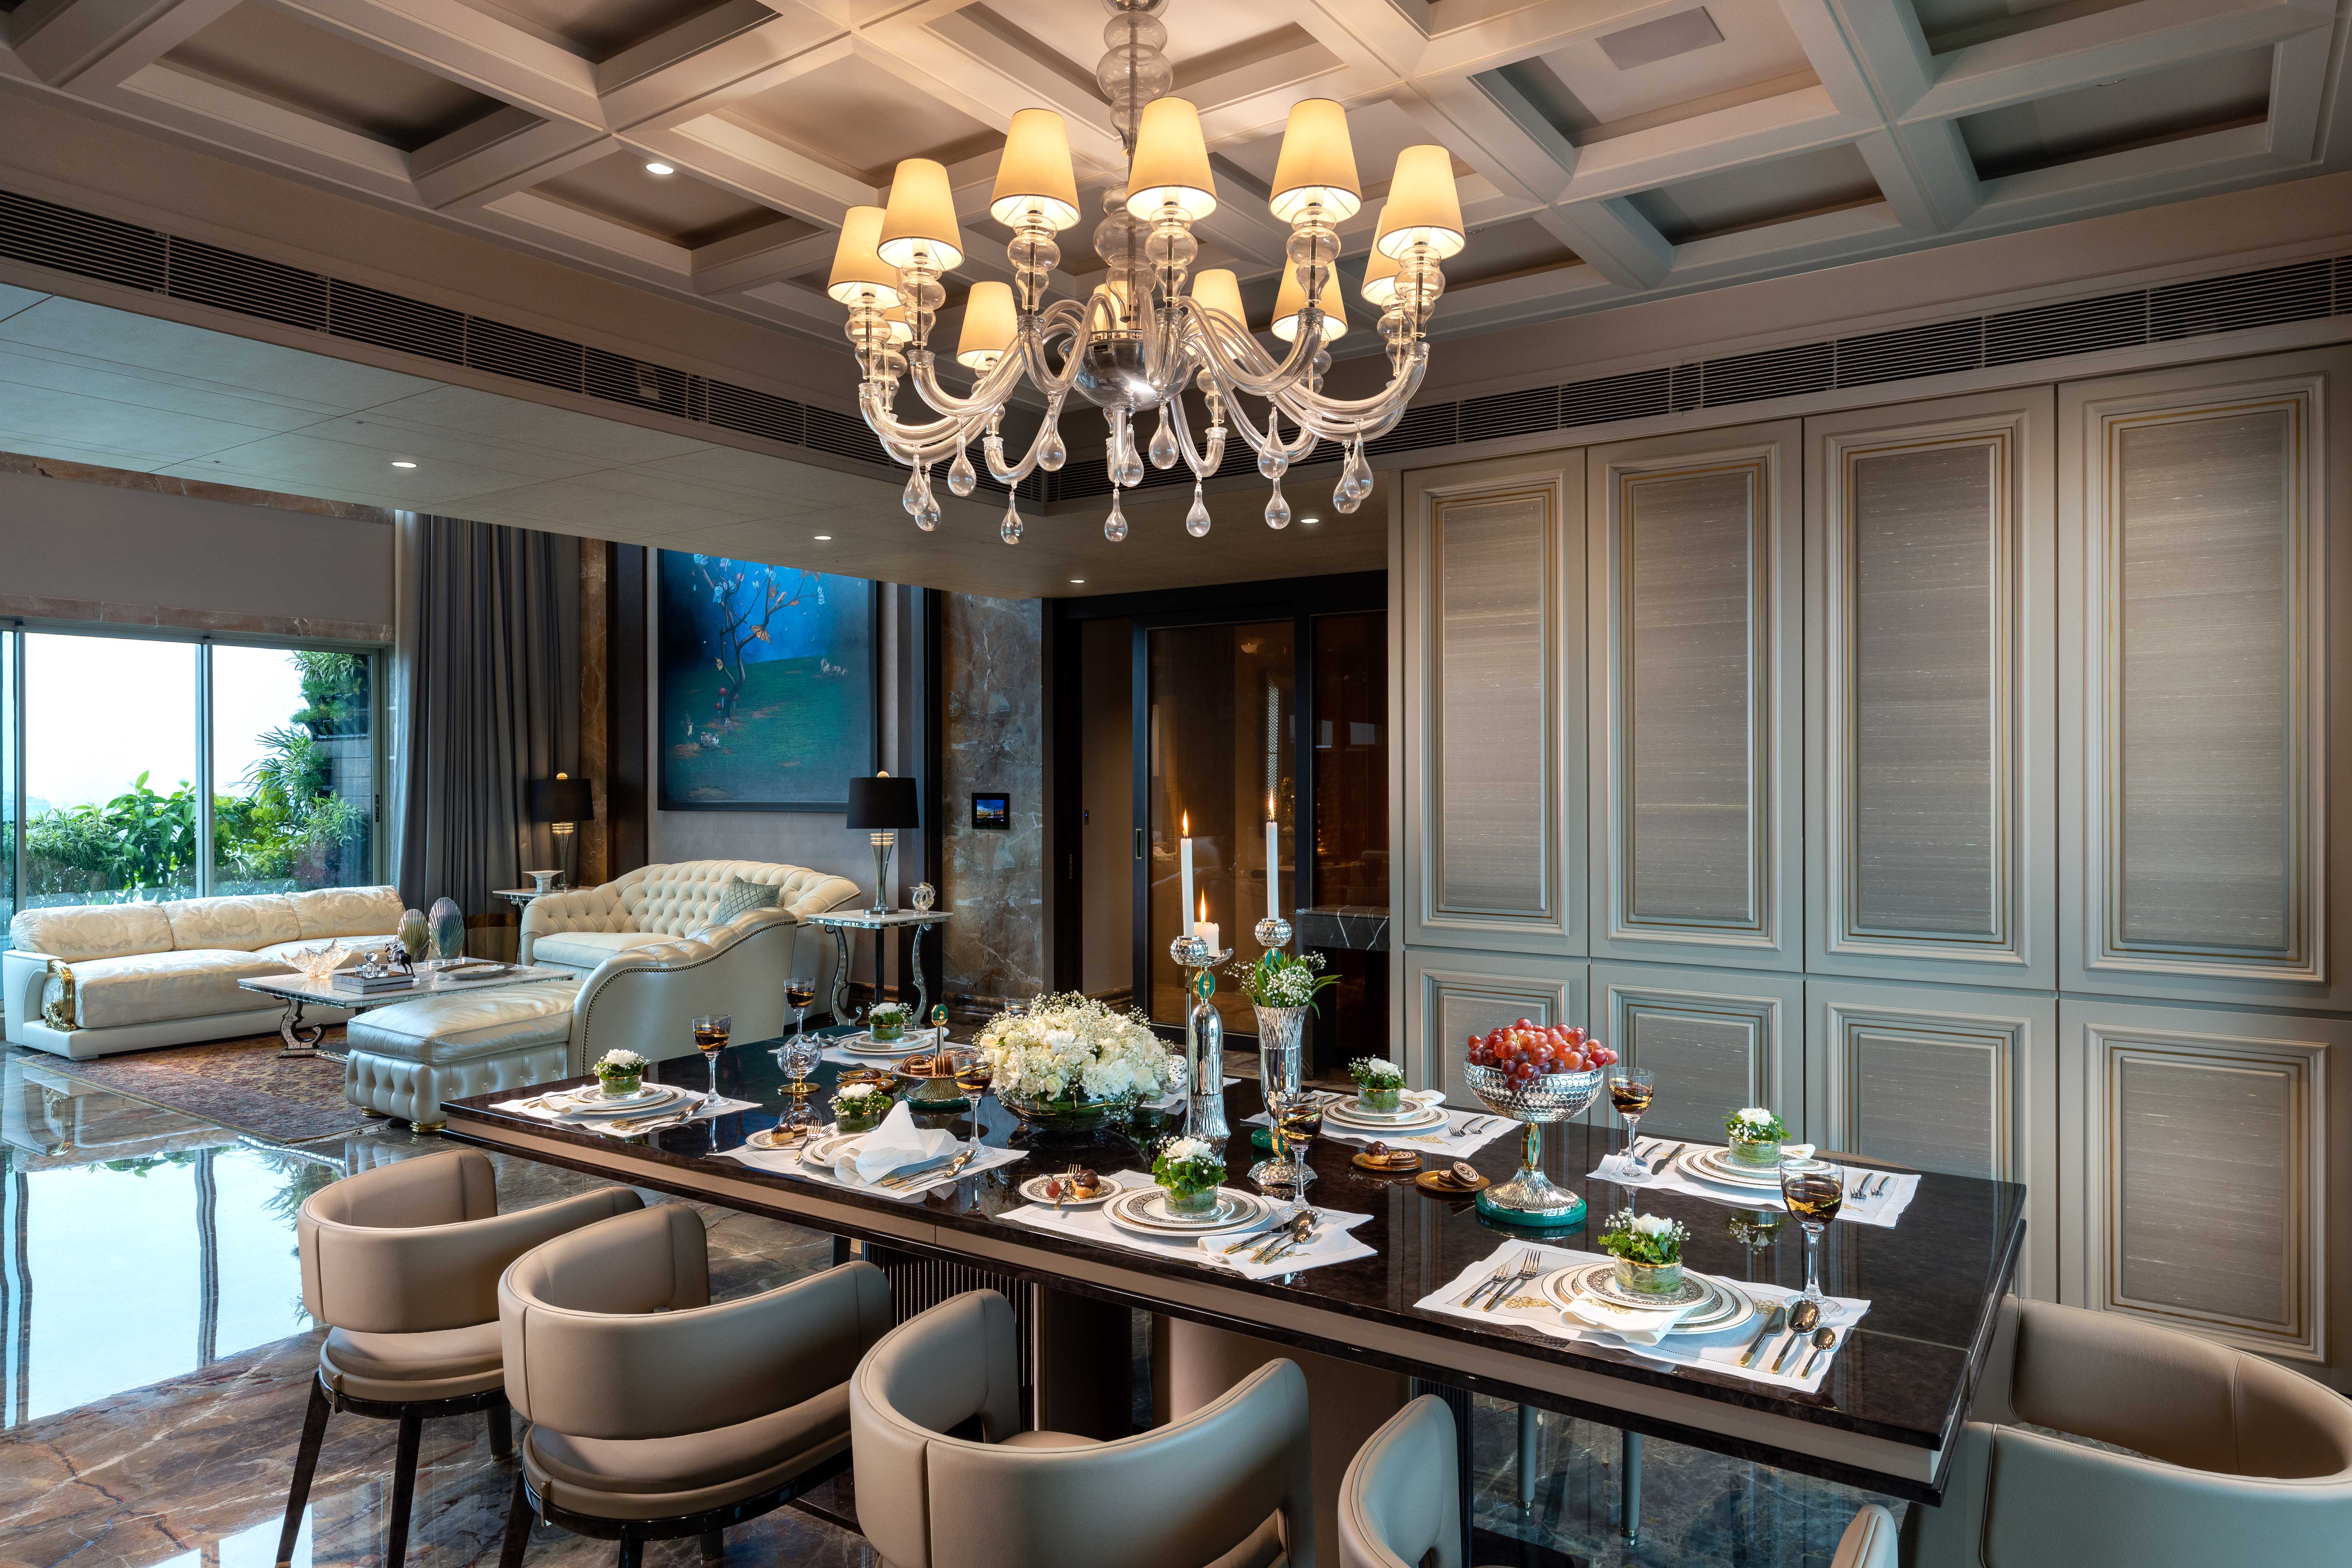 A Square Designs Unveils an Exquisite High-End Dining Room